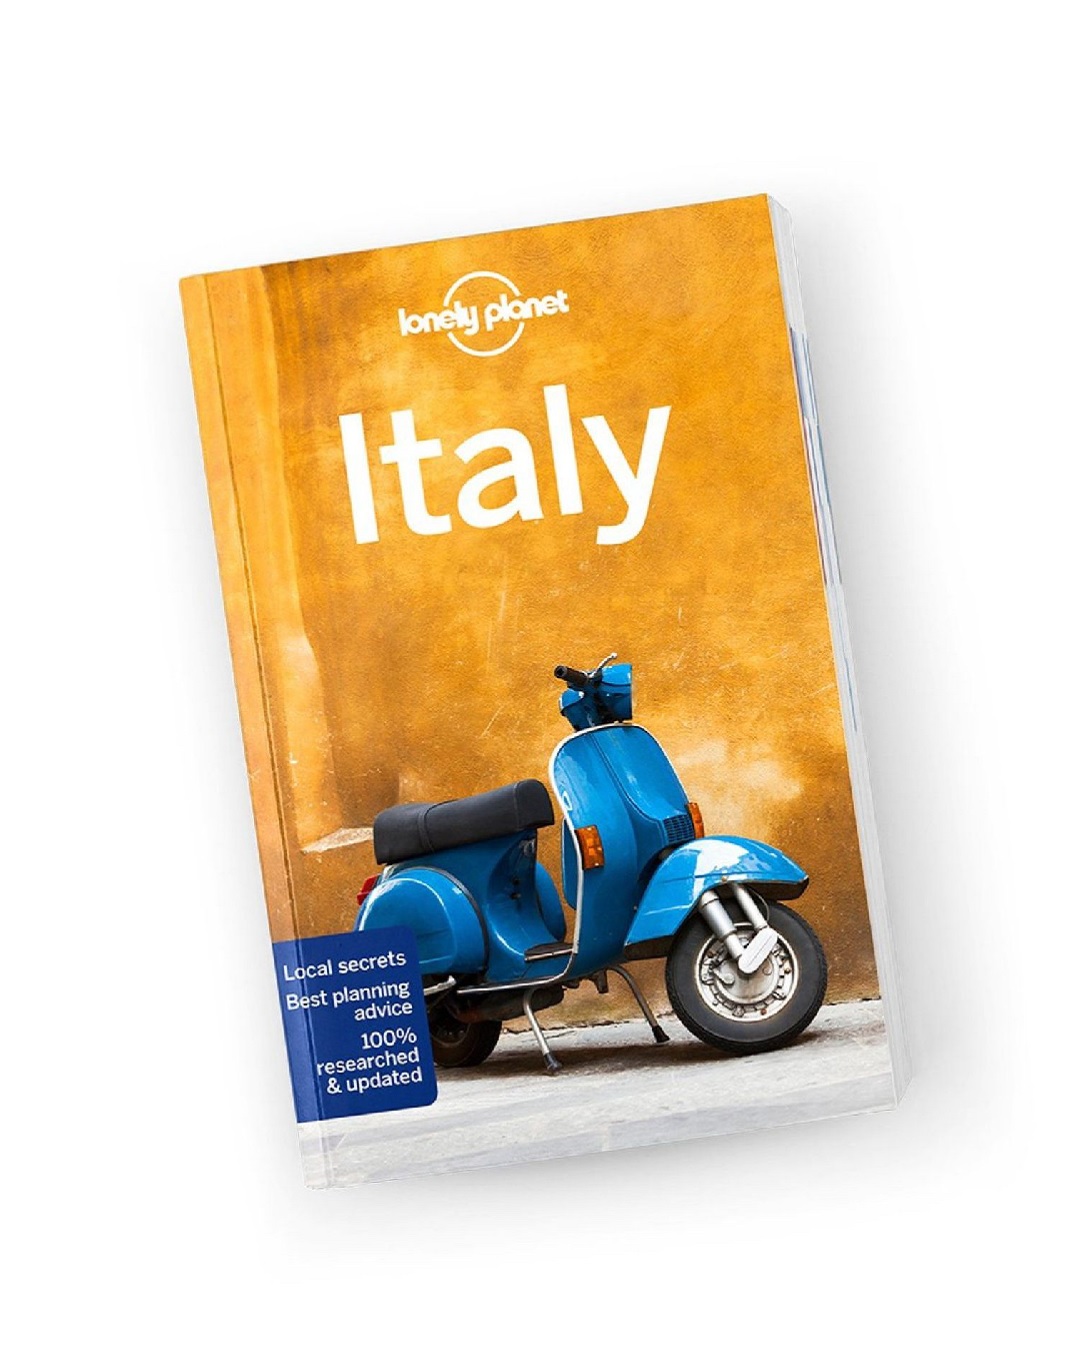 Italy Lonely planet book